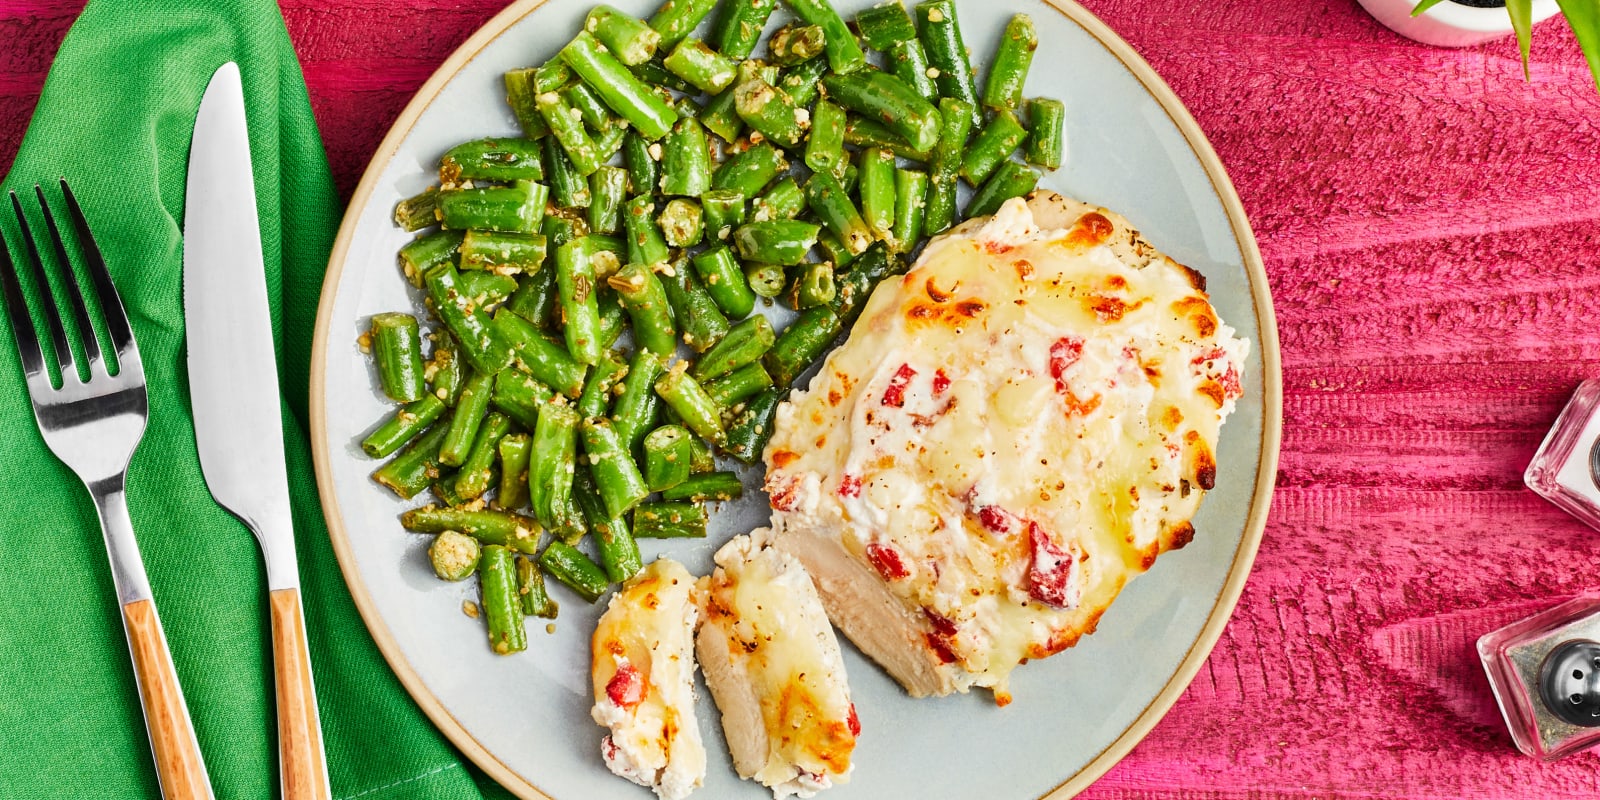 BAKED RICOTTA CHICKEN WITH PESTO GREEN BEANS